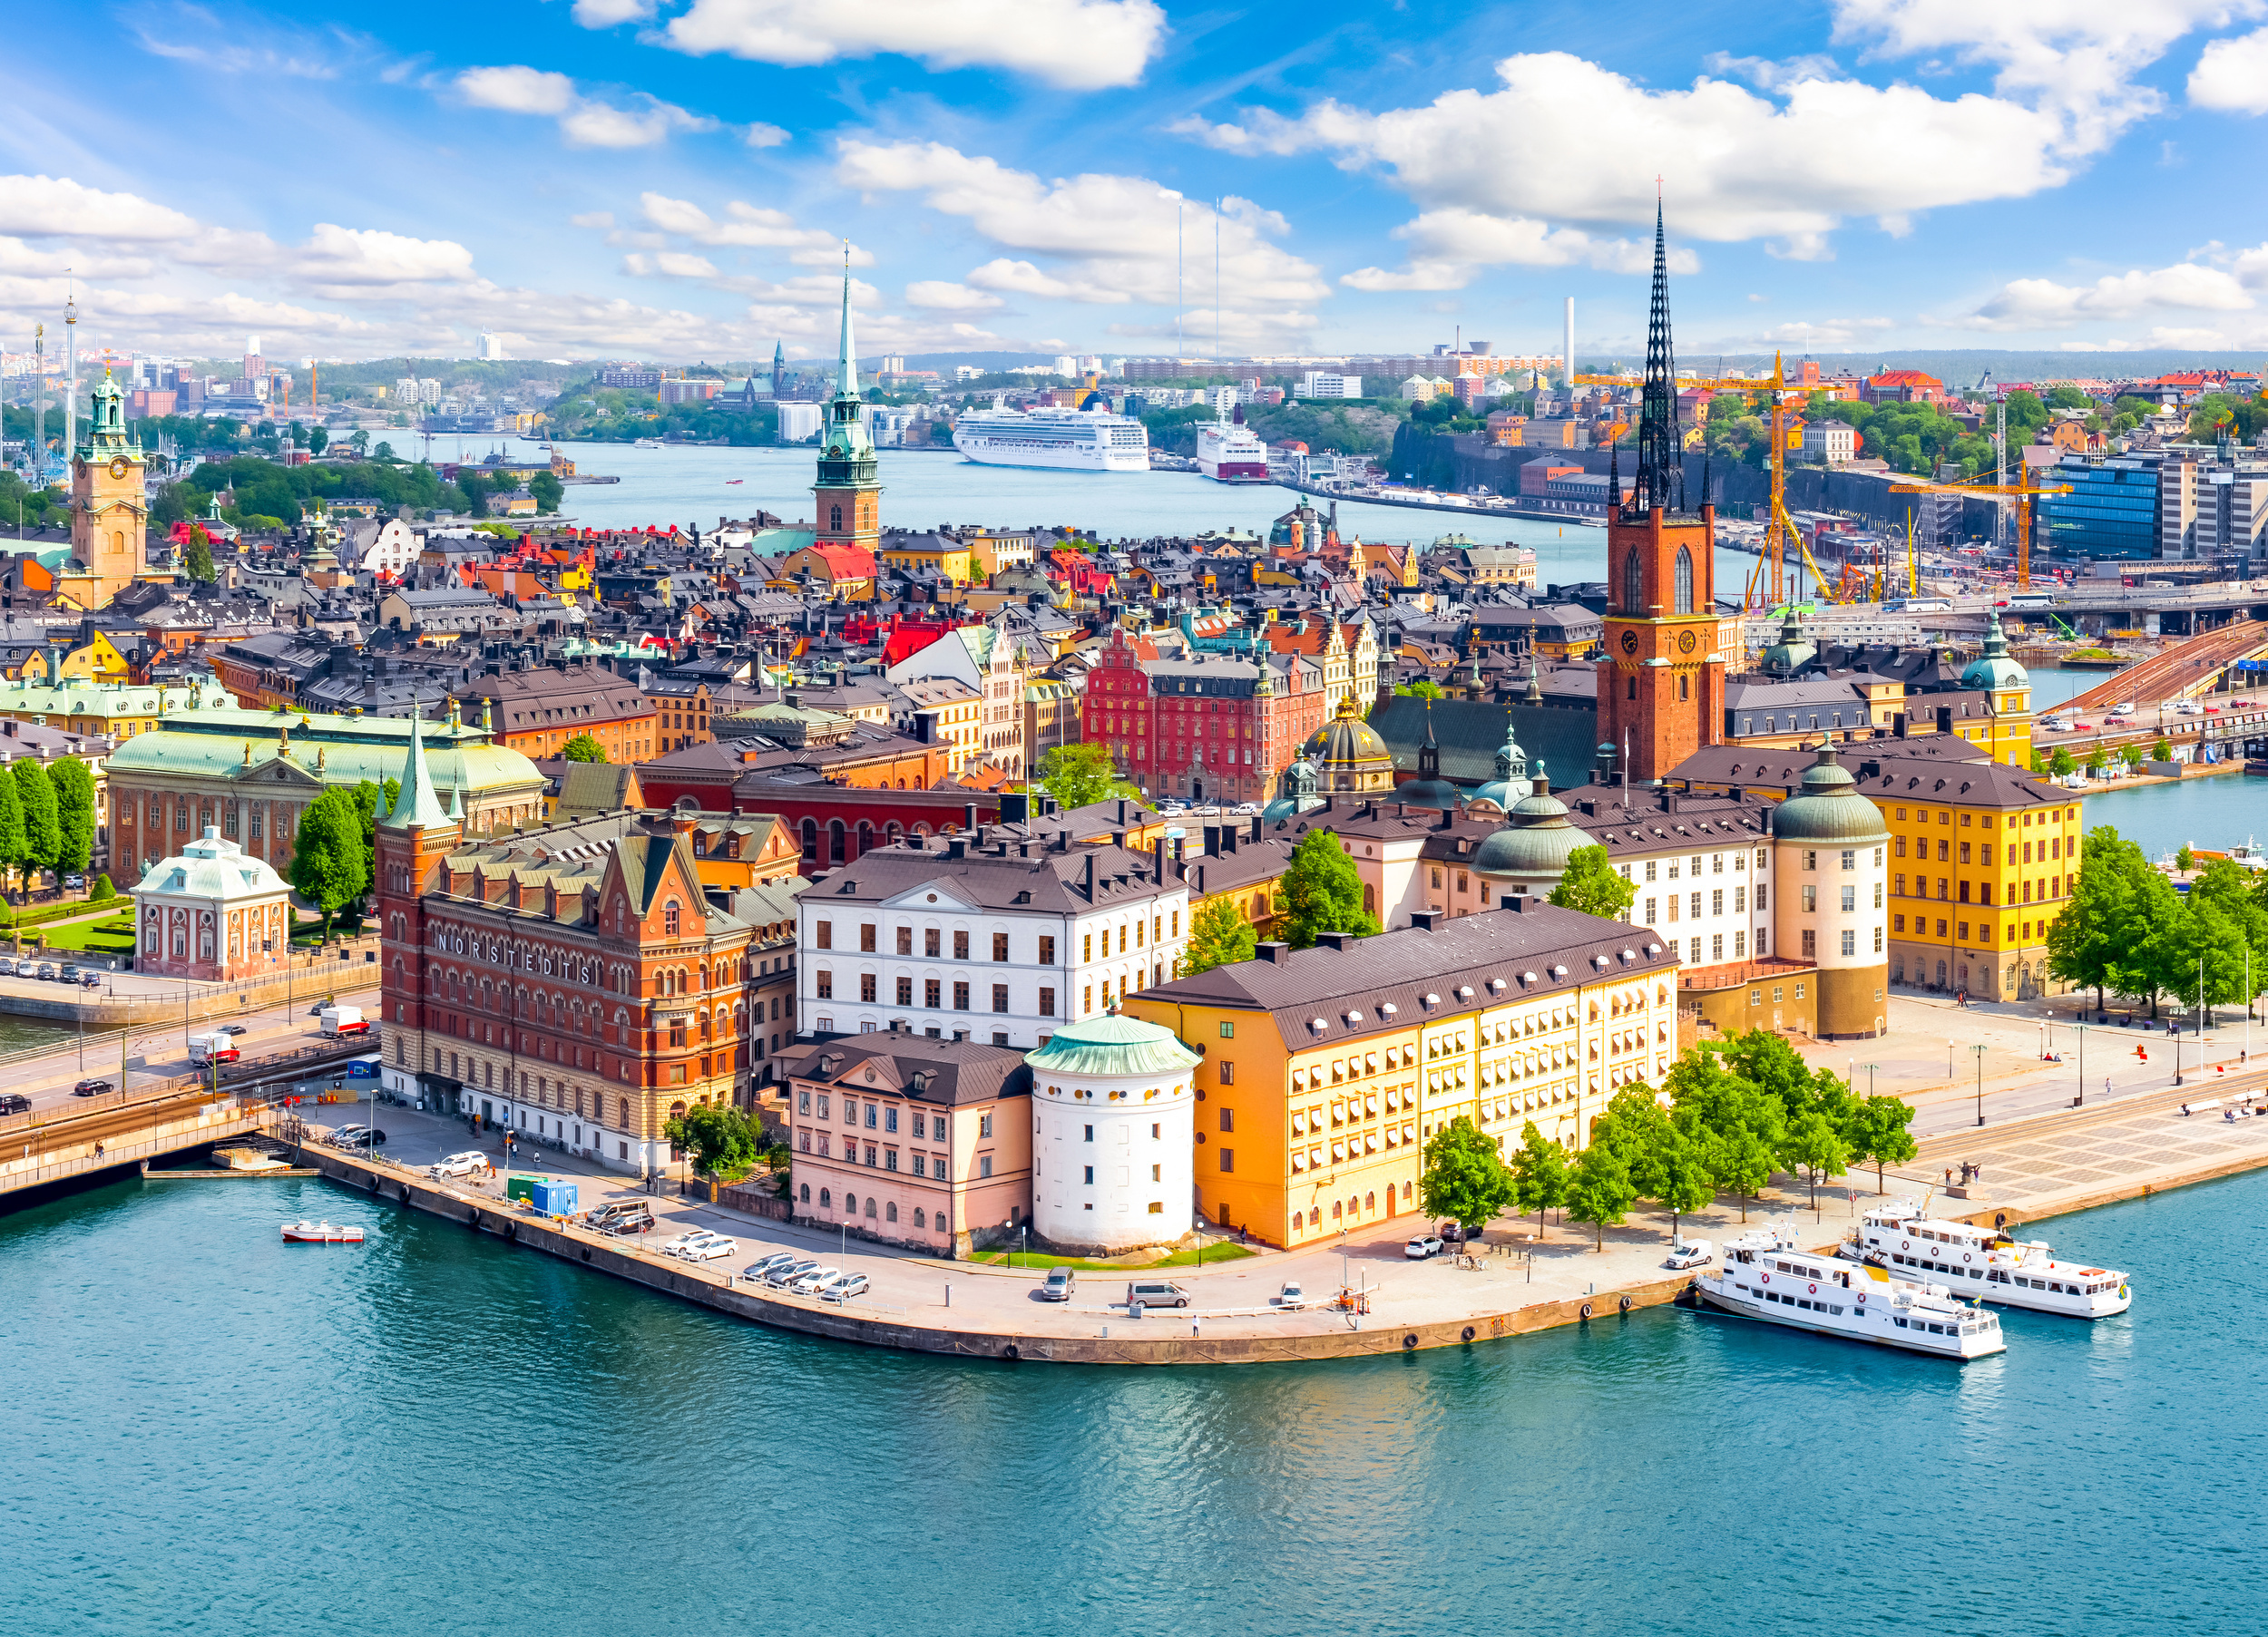 <p>Unless you really like frigid walks and bundling up, it’s most advisable to visit Stockholm in the summer months. Then, you can make the most out of rambling around the Scandinavian city in the sun and enjoying fika (Swedish coffee break) afterward.</p><p>You may also like: <a href='https://www.yardbarker.com/lifestyle/articles/20_items_we_always_include_on_our_charcuterie_board_012424/s1__38337643'>20 items we always include on our charcuterie board</a></p>